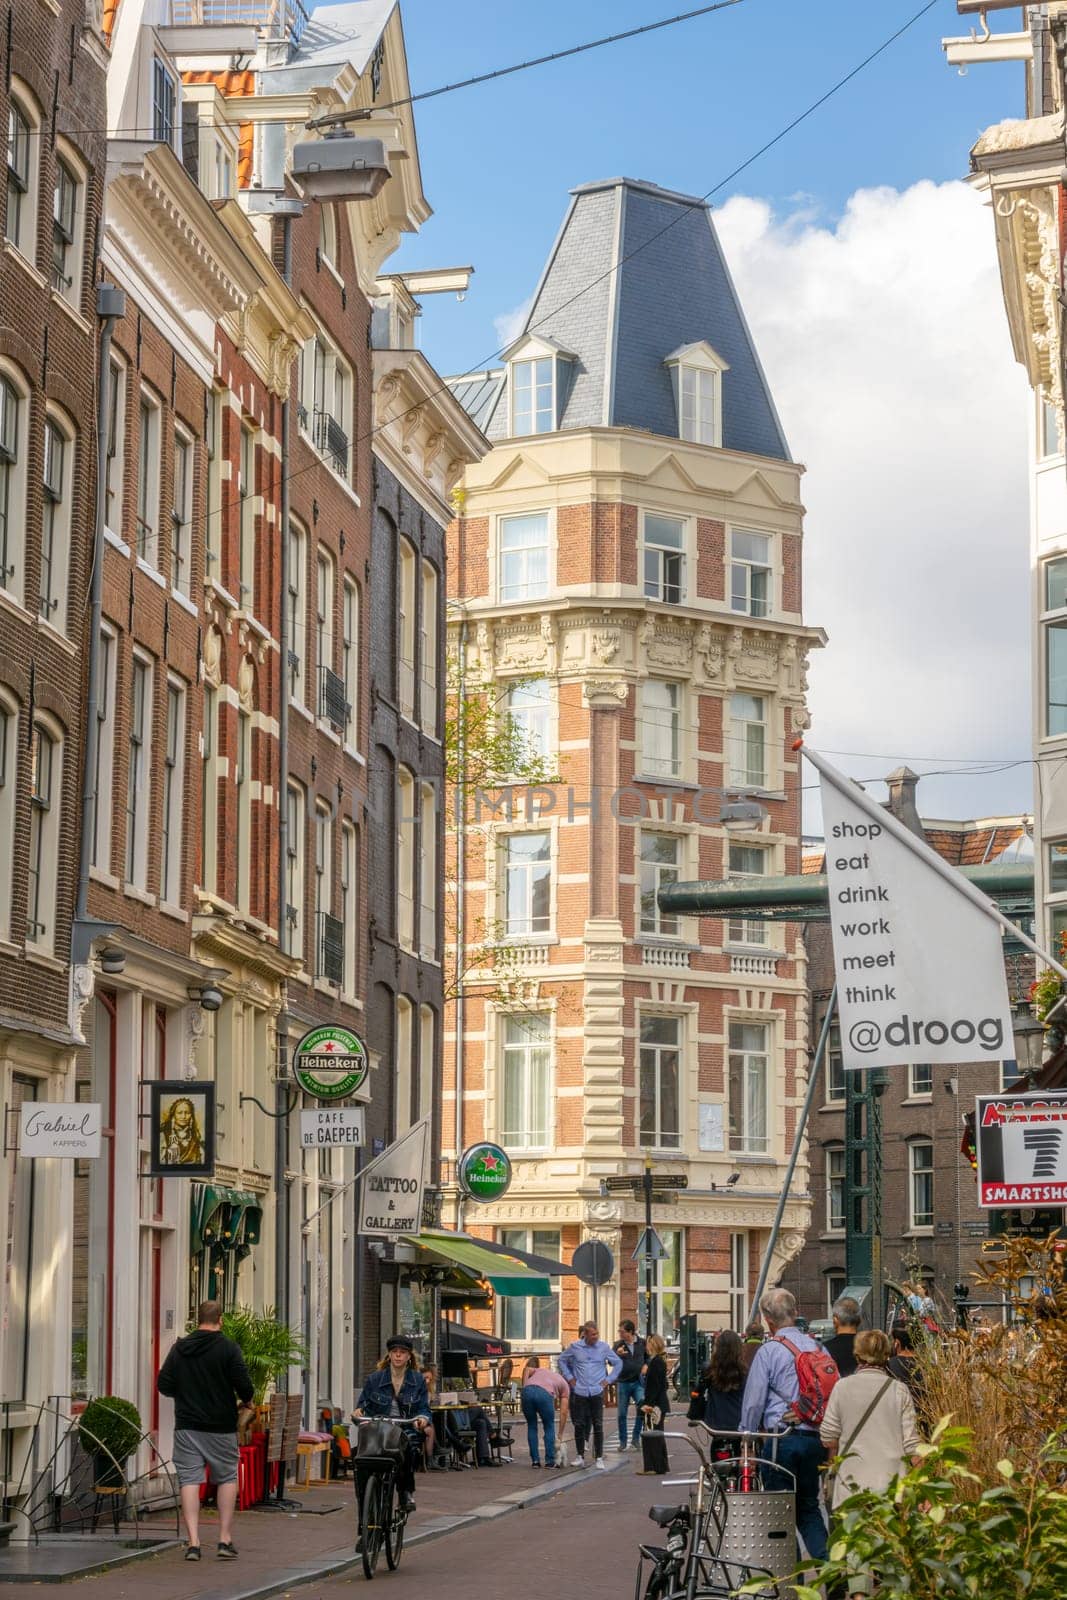 Netherlands. Sunny summer day in the center of Amsterdam. Facades of typical Dutch houses with various advertising signs and flags and people on a narrow pedestrian street